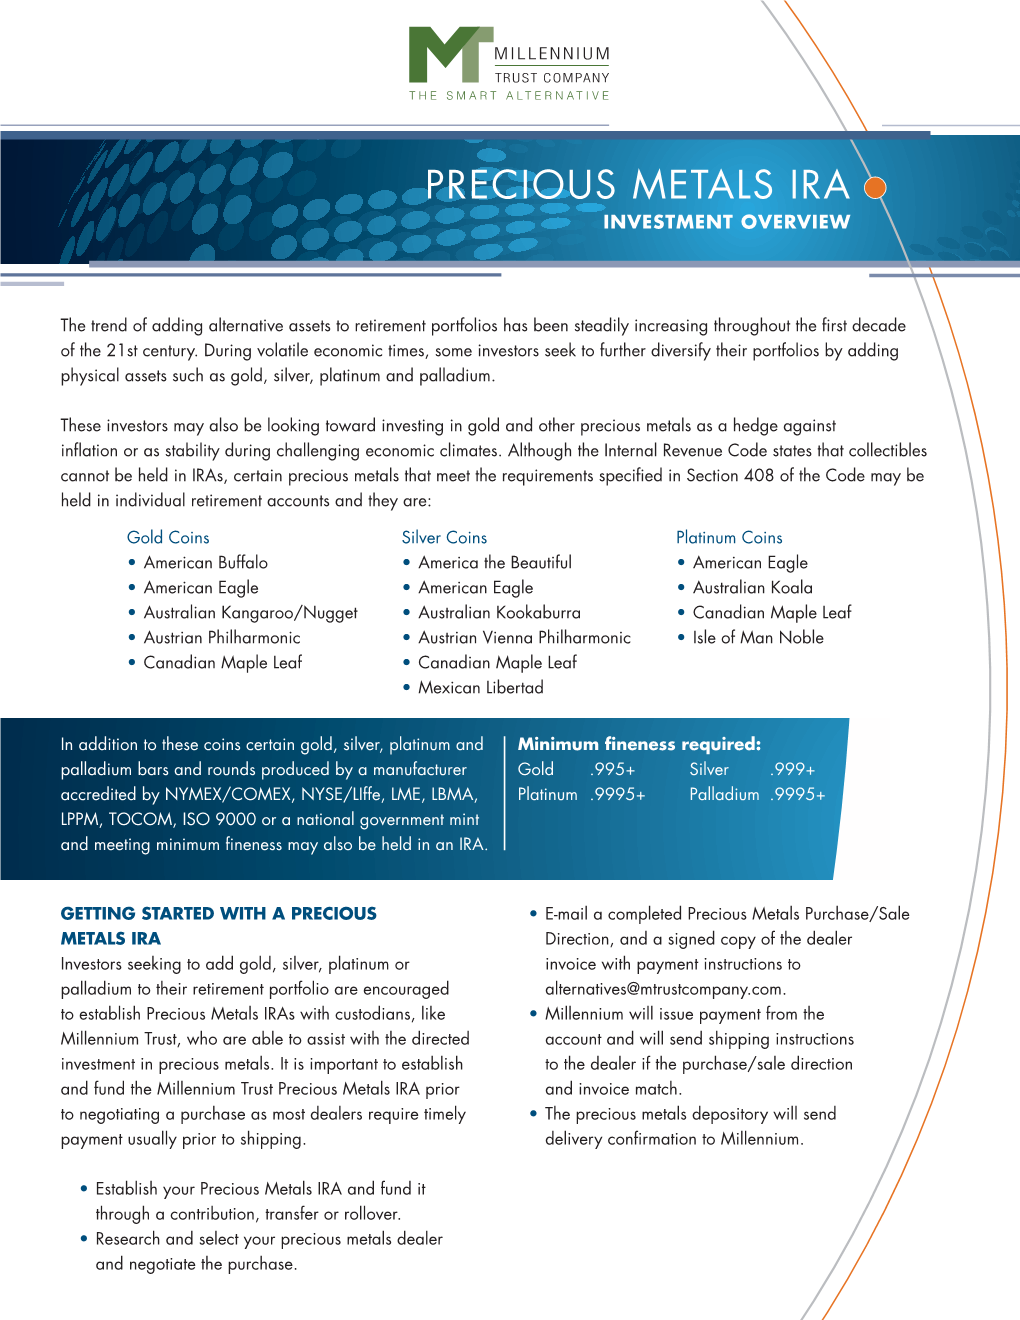 Precious Metals Ira Investment Overview